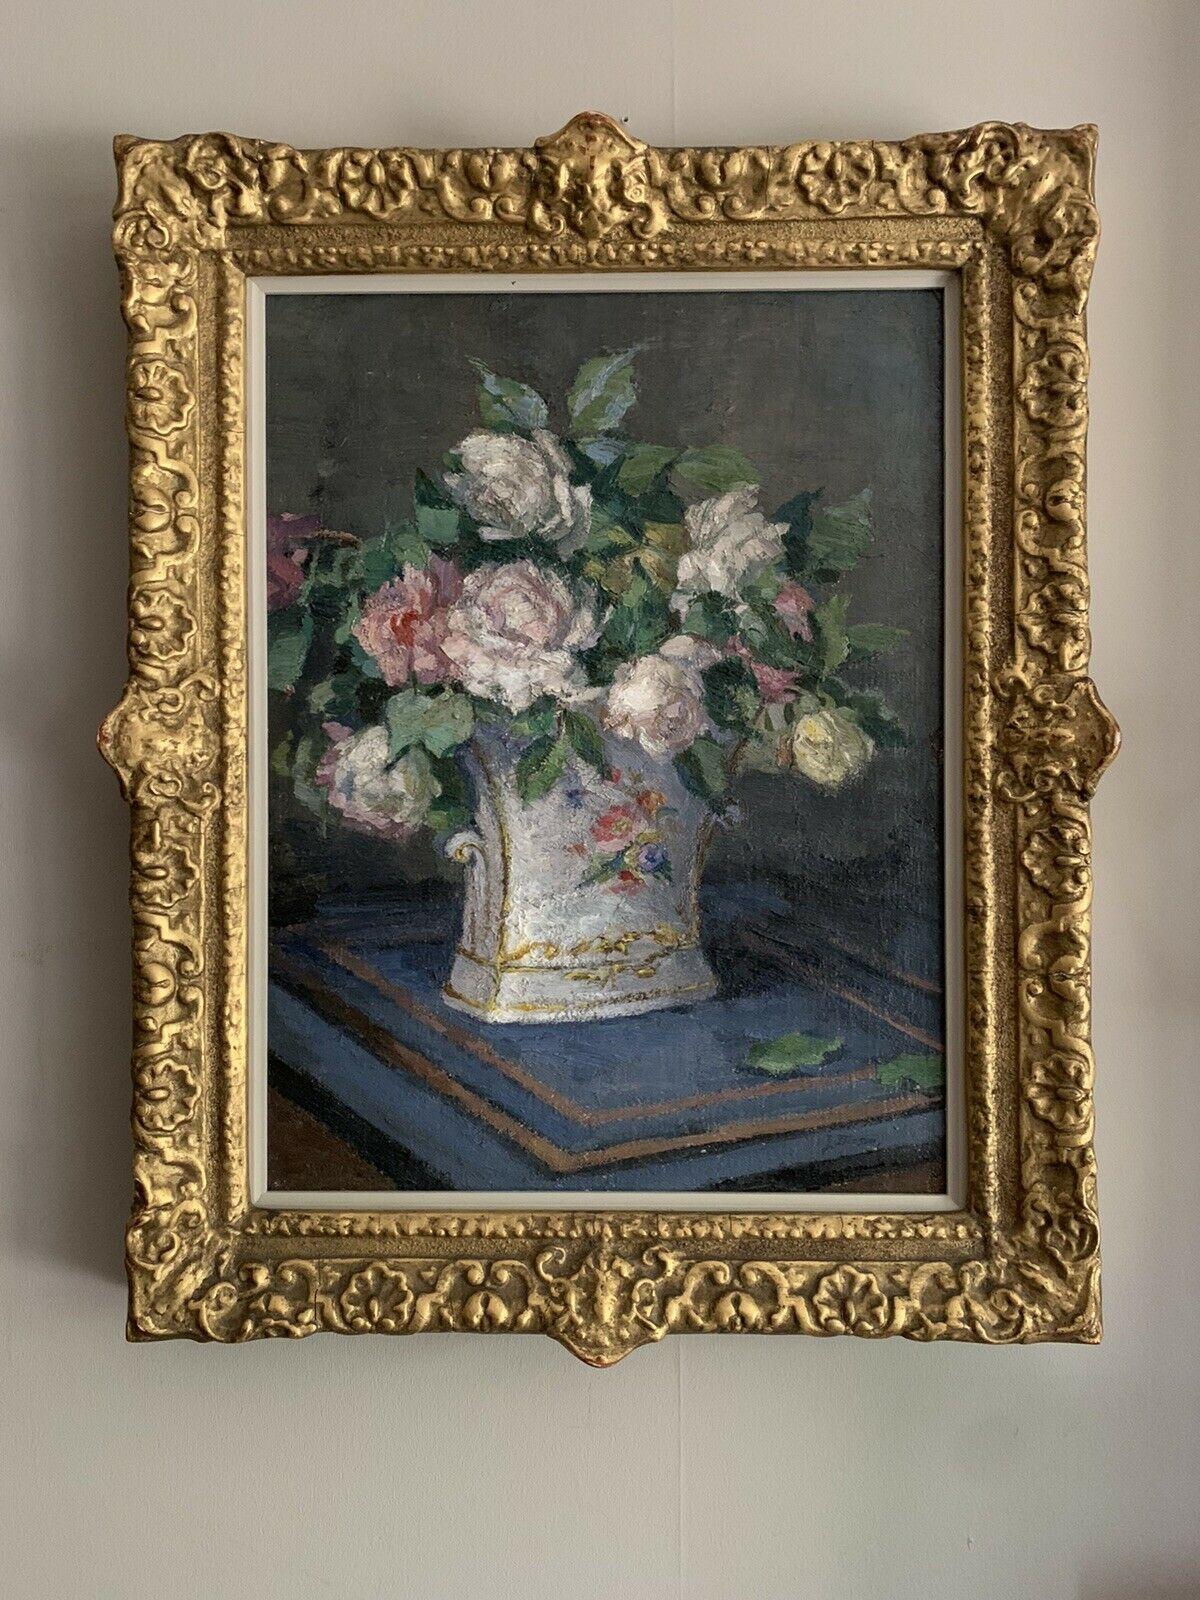 EARLY 1900'S ENGLISH IMPRESSIONIST SIGNED OIL - STILL LIFE ROSES IN ORNATE VASE - Painting by J. MASON